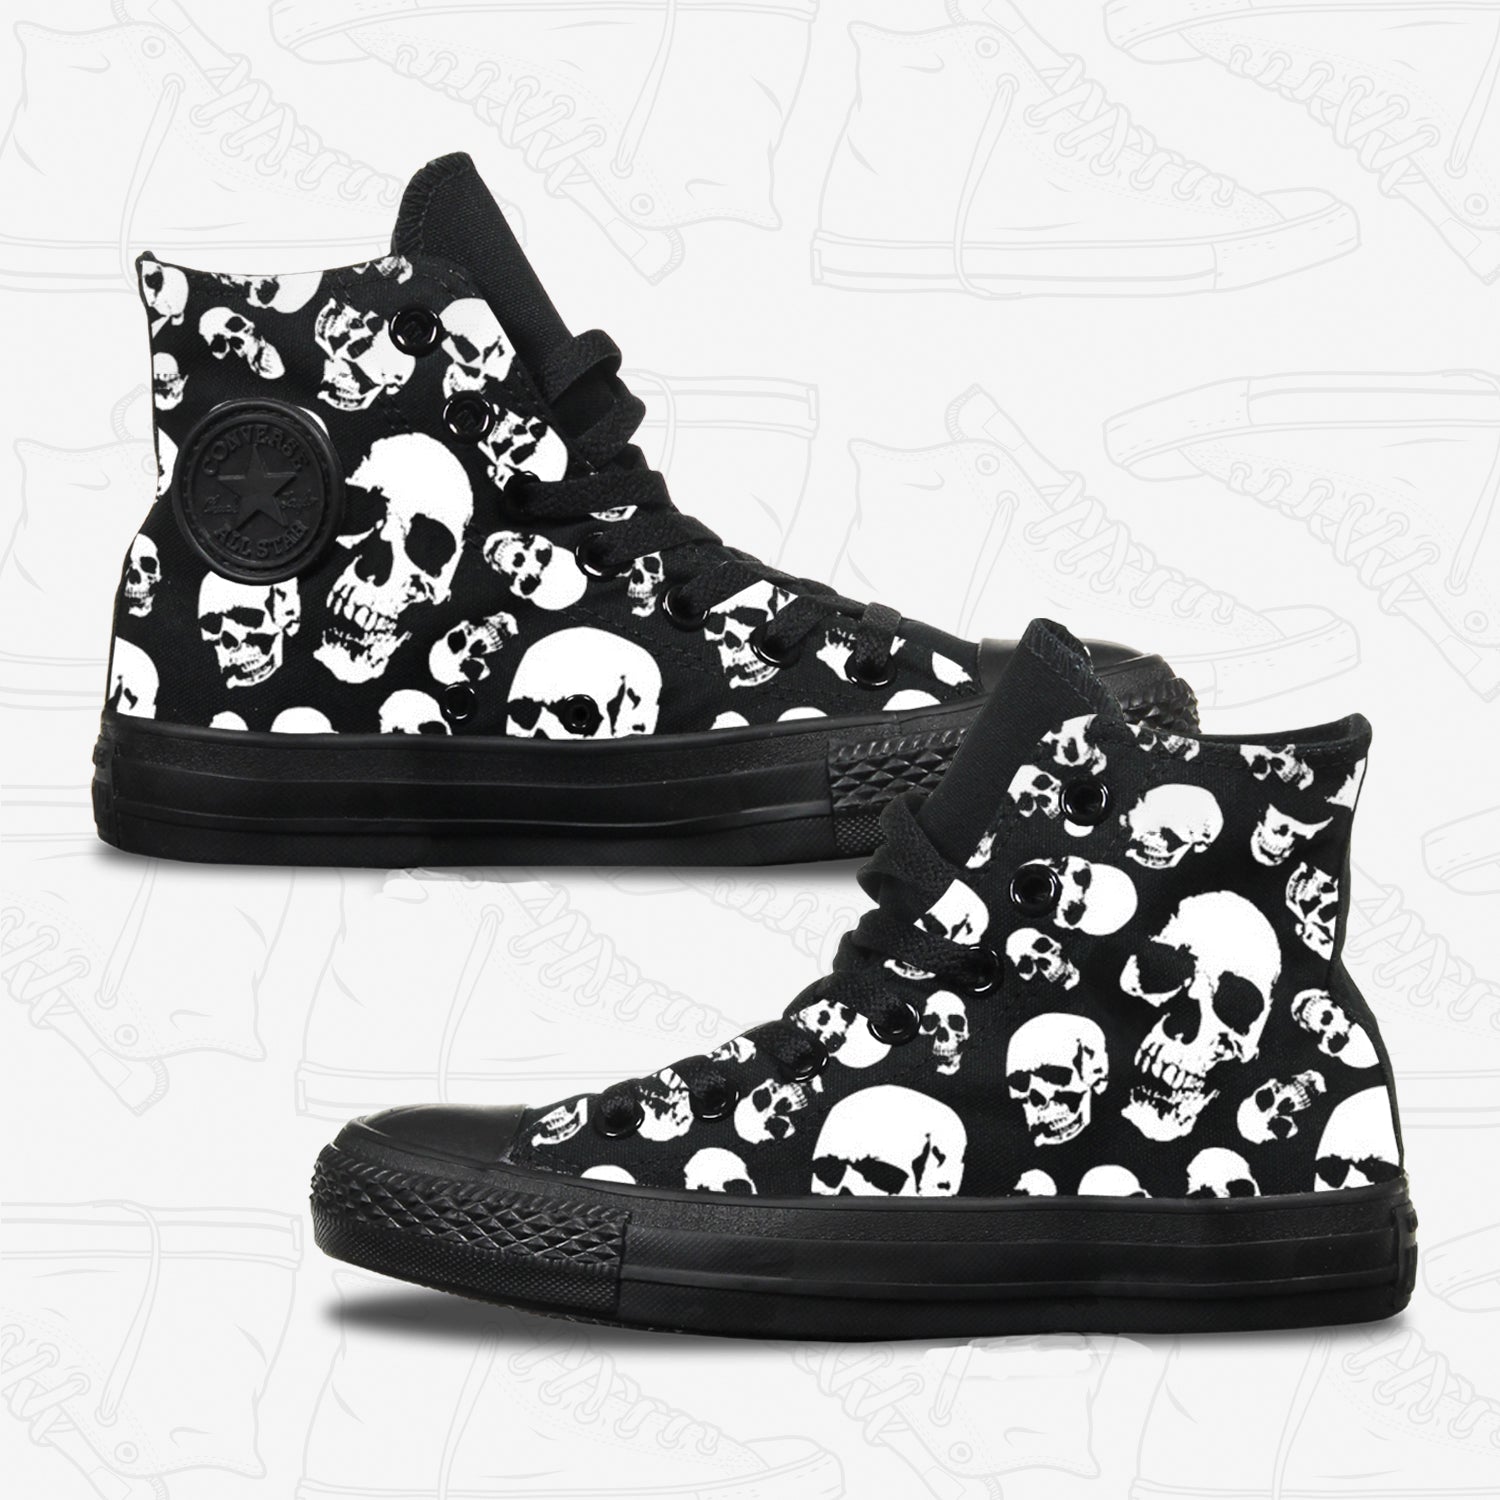 converse with skulls